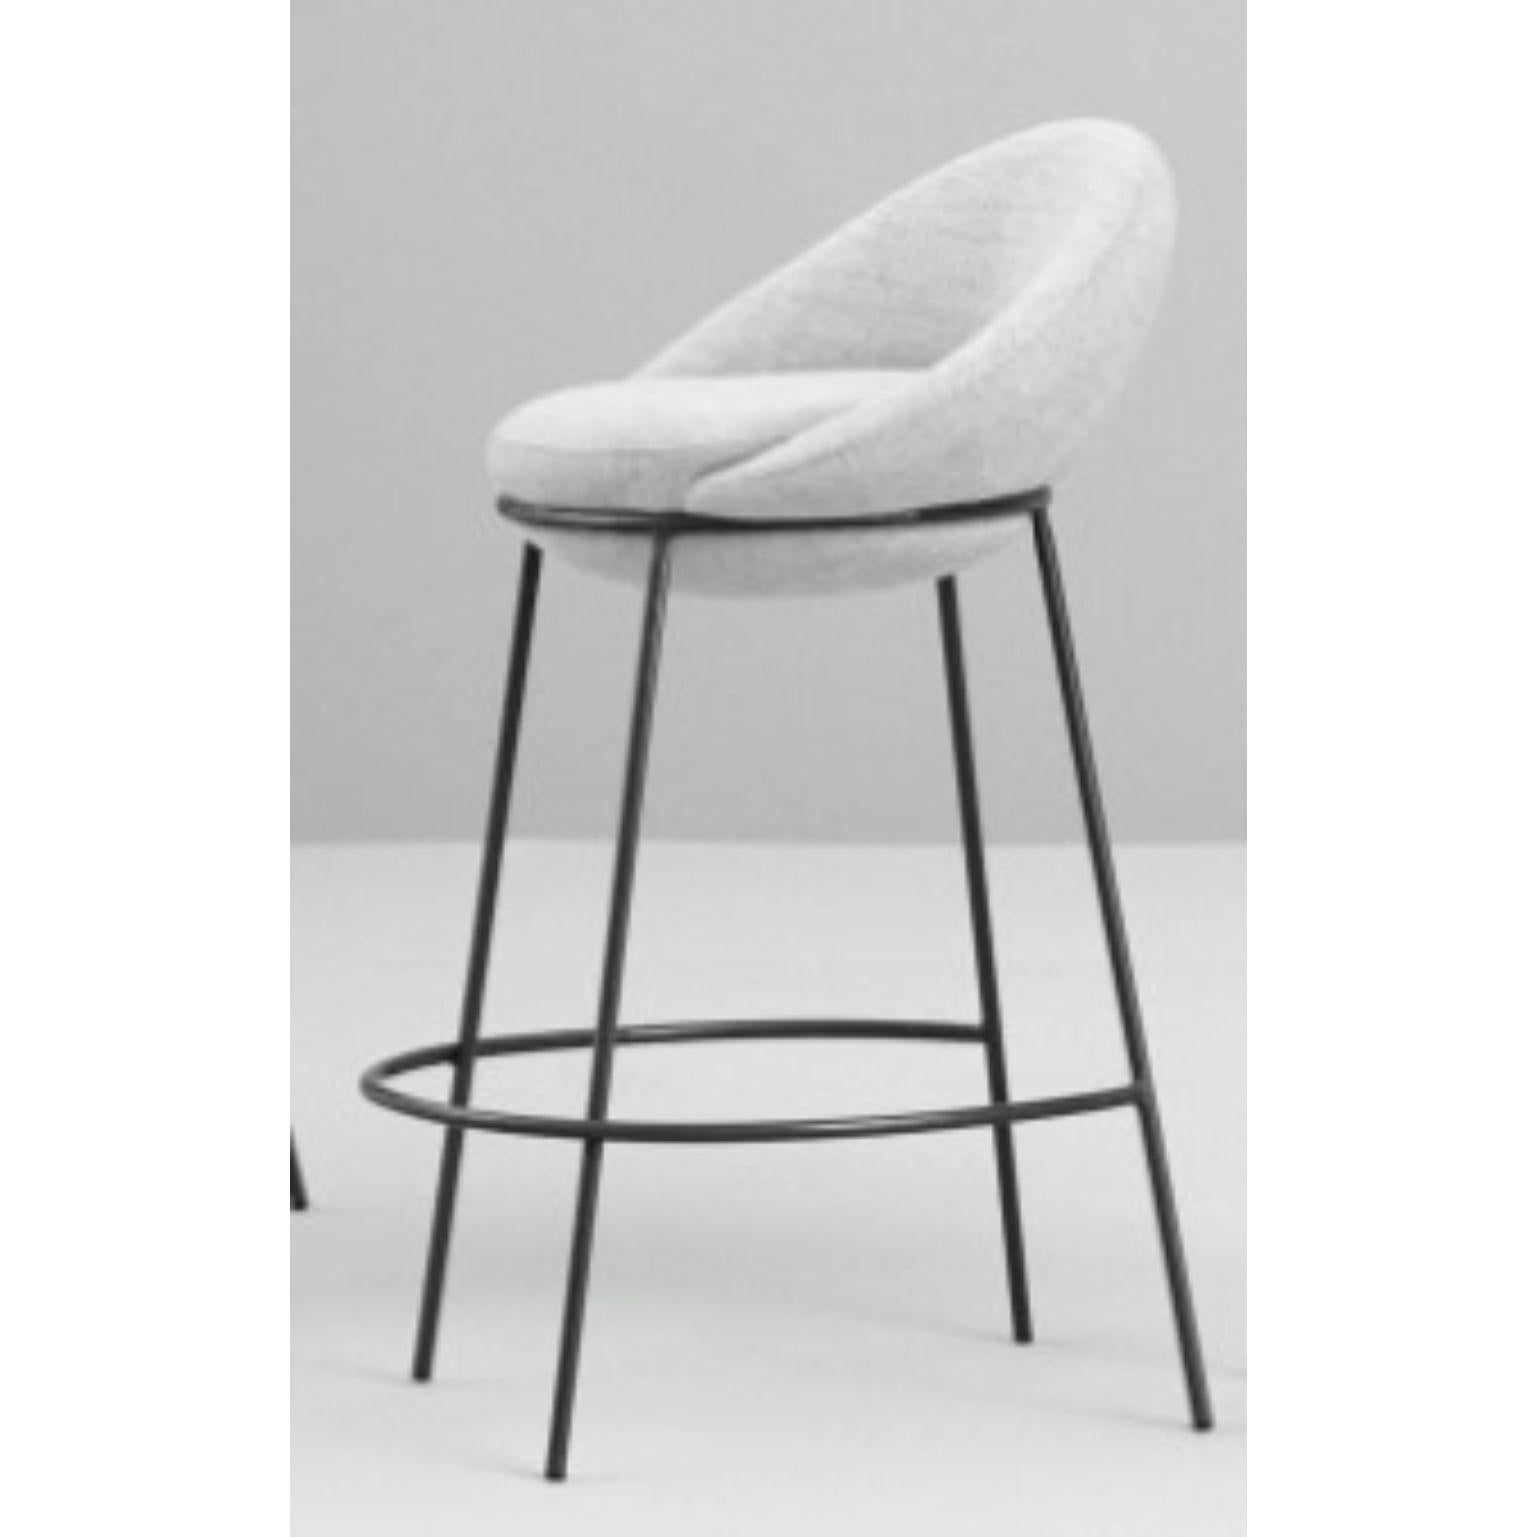 Nest stool with backrest by Paula Rosales
Dimensions: W48, D57, H92, Seat74
Materials: Iron structure and MDF board
Foam CMHR (high resilience and flame retardant) for all our cushion filling systems
Painted or chromed legs

Also available: